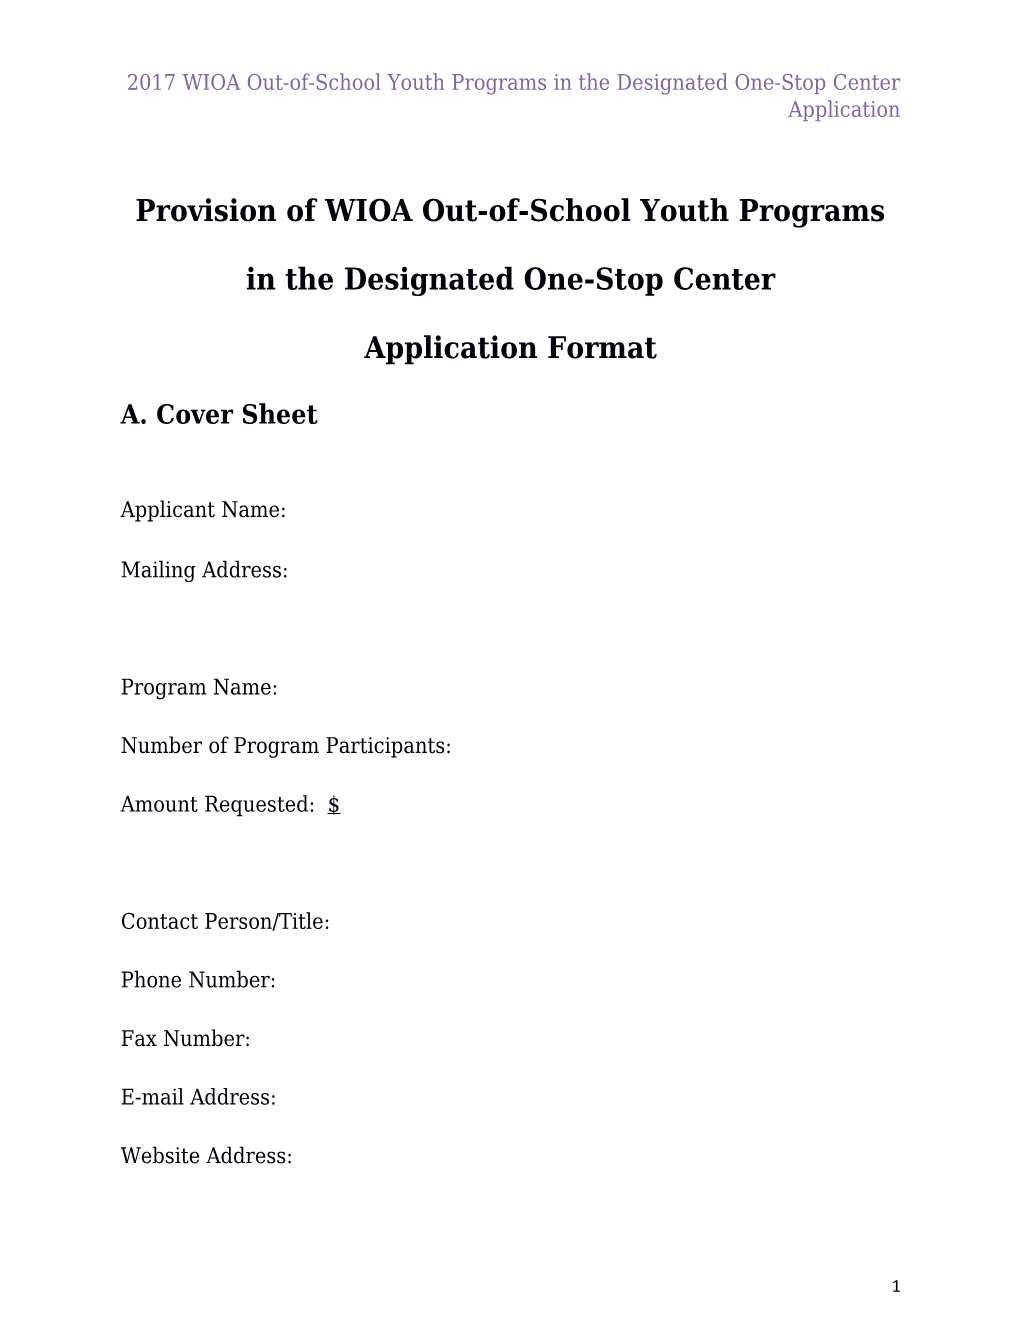 Provision of WIOA Out-Of-School Youth Programs